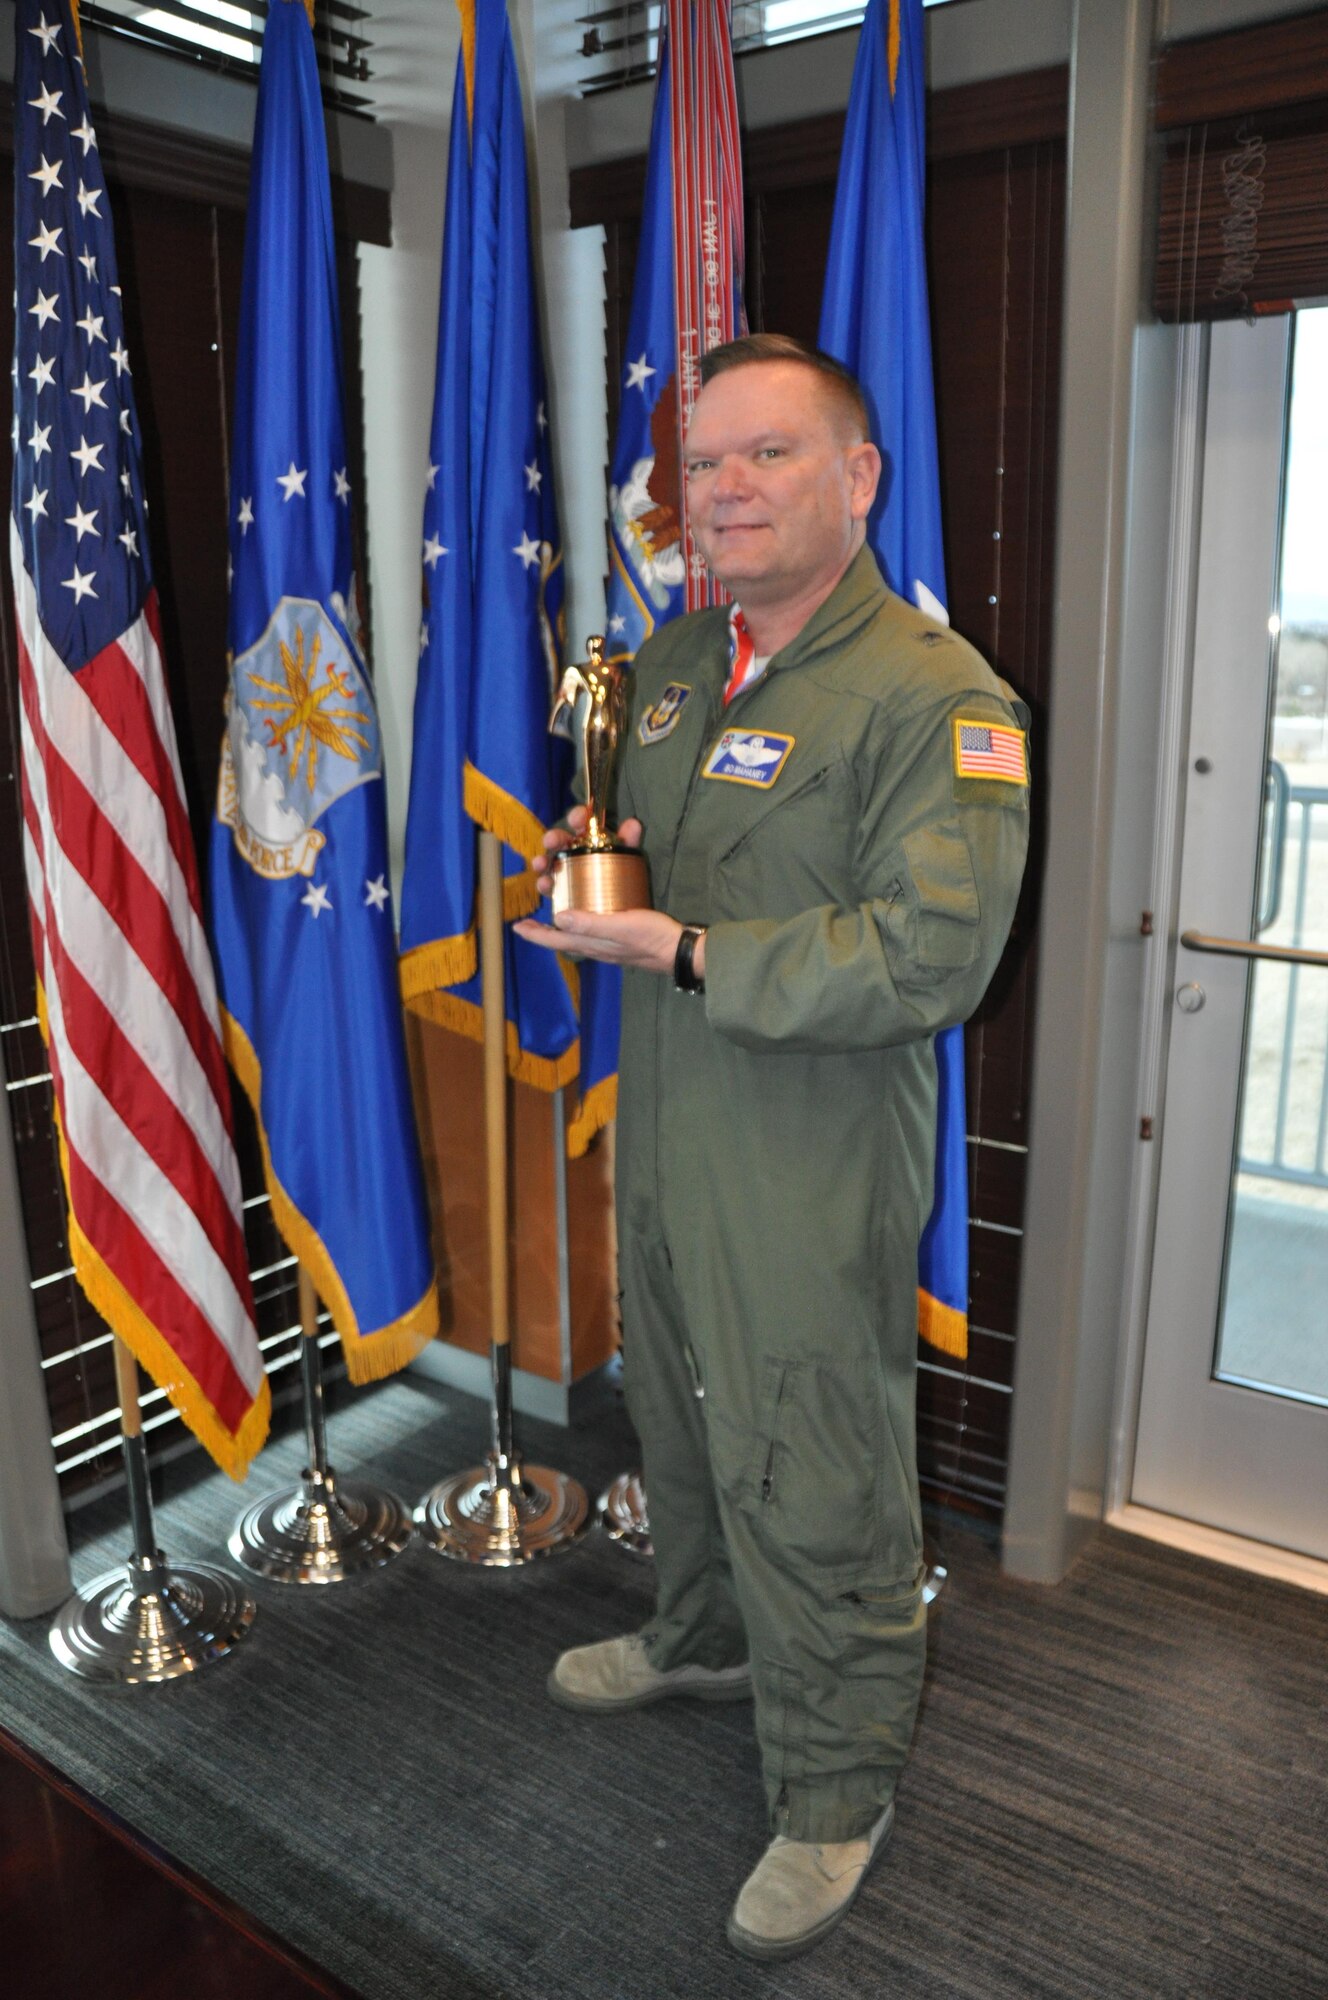 Brig. Gen. Samuel "Bo" Mahaney, Air Reserve Personnel Center commander, stands with his award Feb. 11 at ARPC on Buckley Air Force Base, Colo. Mahaney received the Public Affairs Champion award during the 2016 Air Force Reserve Command Leadership Symposium Feb. 9 at Marietta, Ga. The award recognizes commanders who are highly supportive and involved in the public affairs career field. (U.S. Air Force photo/Tech. Sgt. Rob Hazelett)